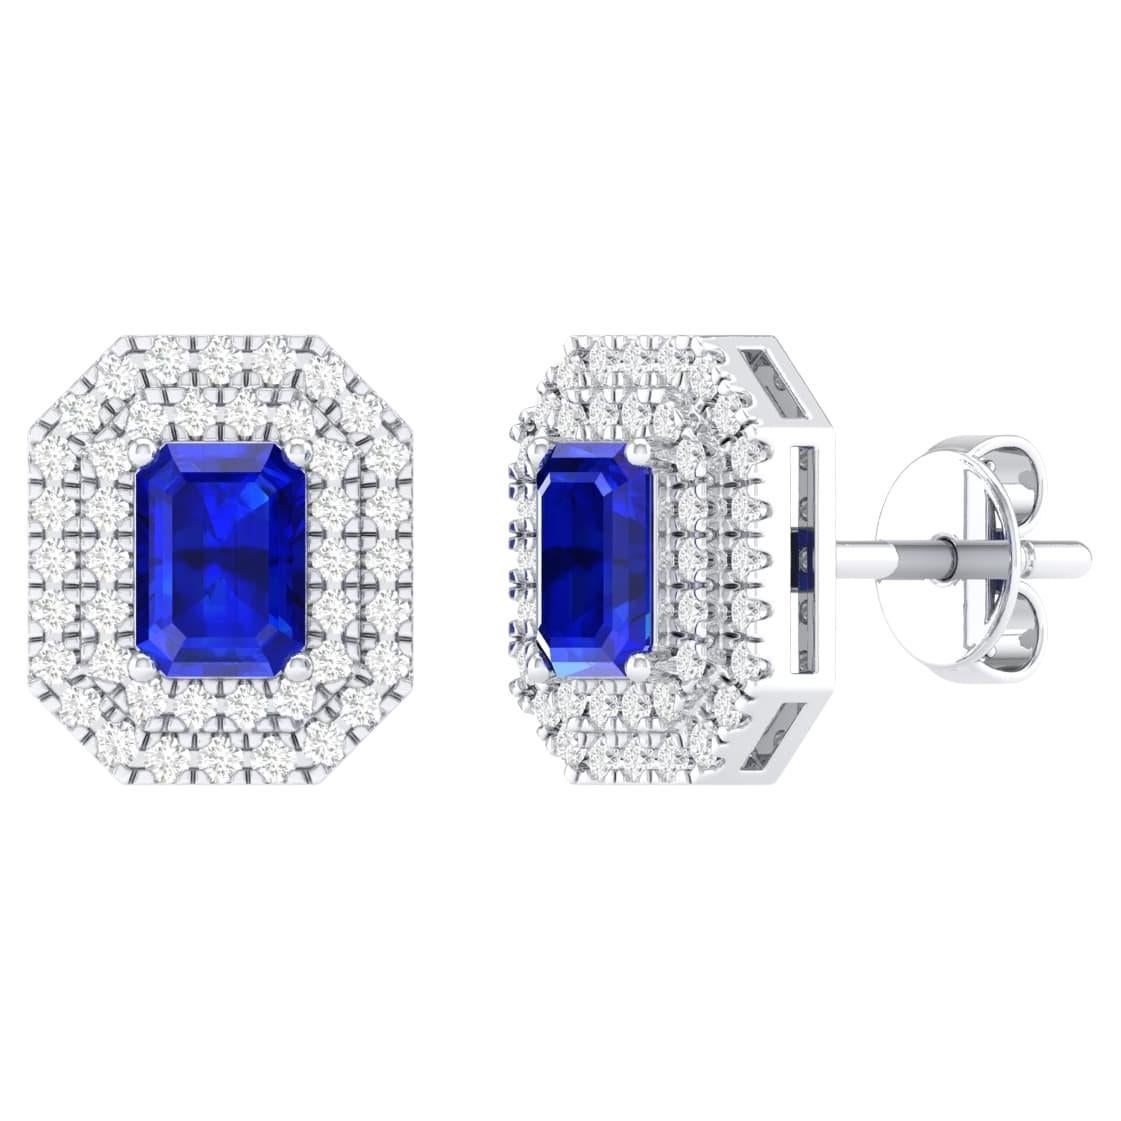 18 Karat White Gold 1.26 Carat Sapphire Solitaire Stud Earrings For Sale